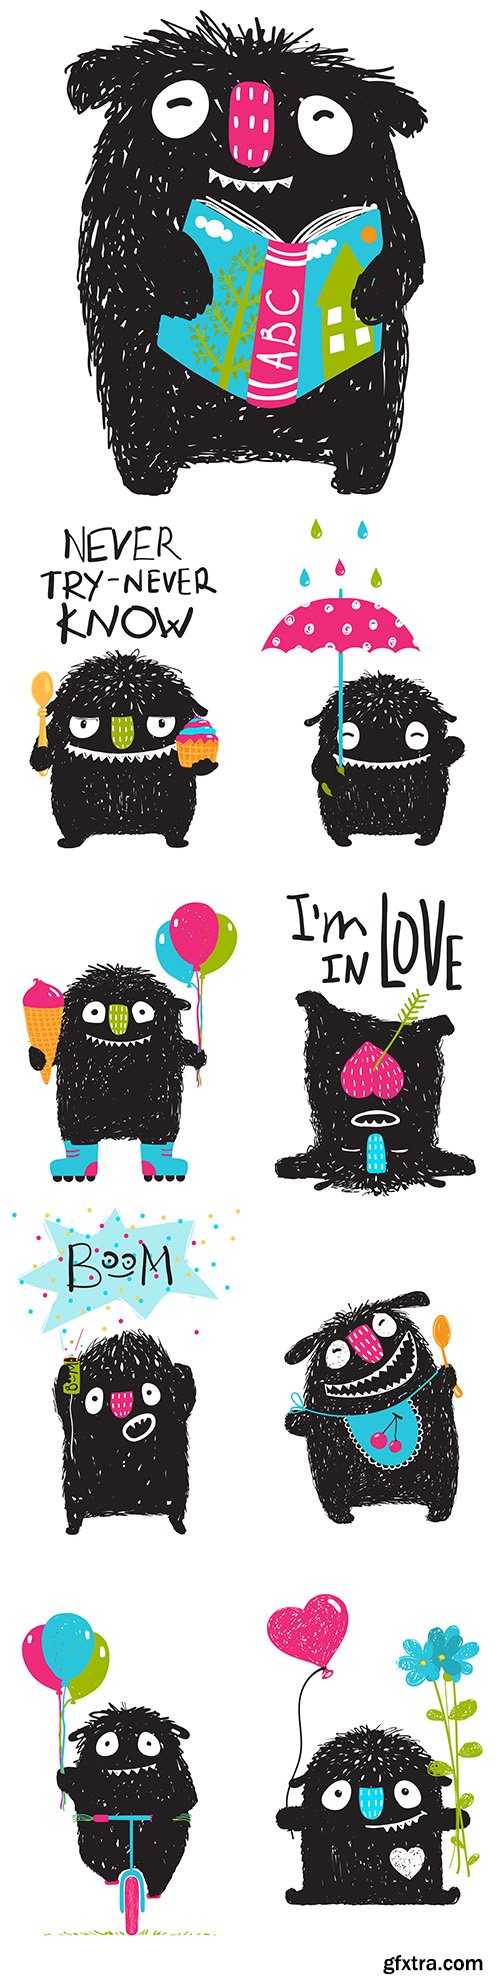 Funny monster with flowers and hearts illustration for children